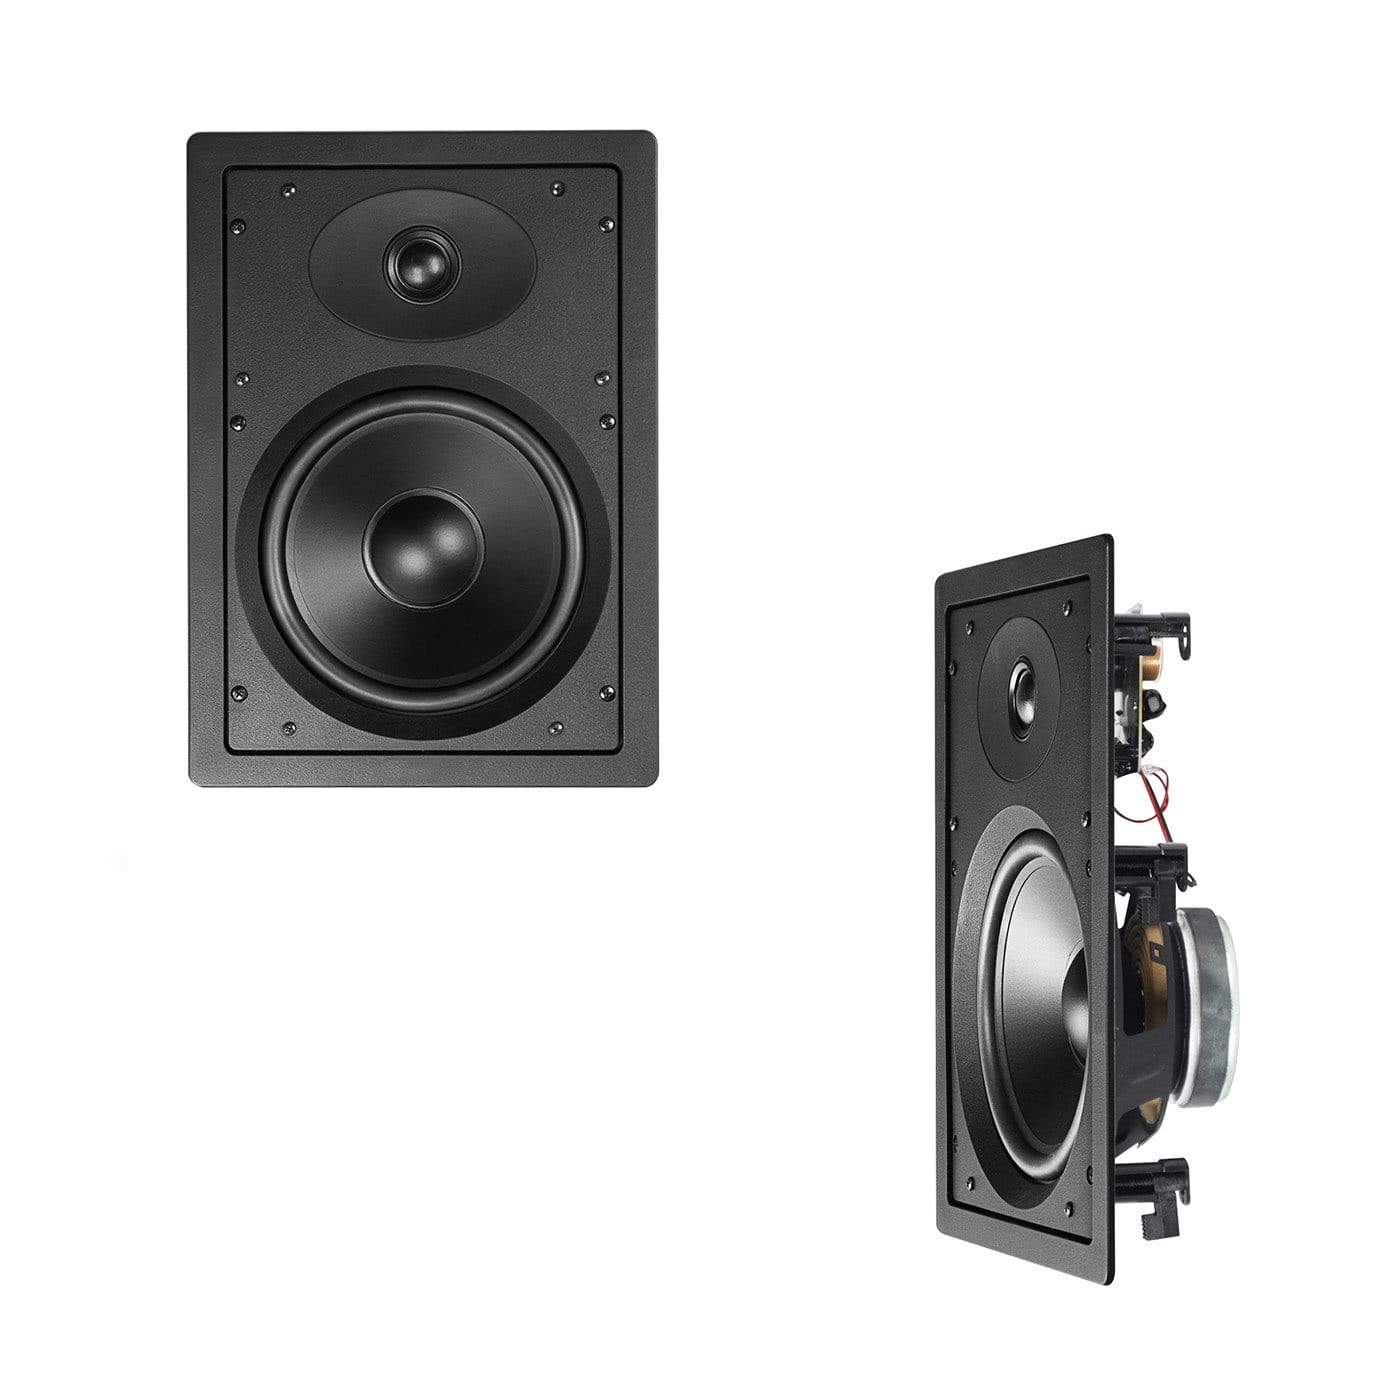 Encel 8" In-Wall Speakers Pair - Home Theatre or Music